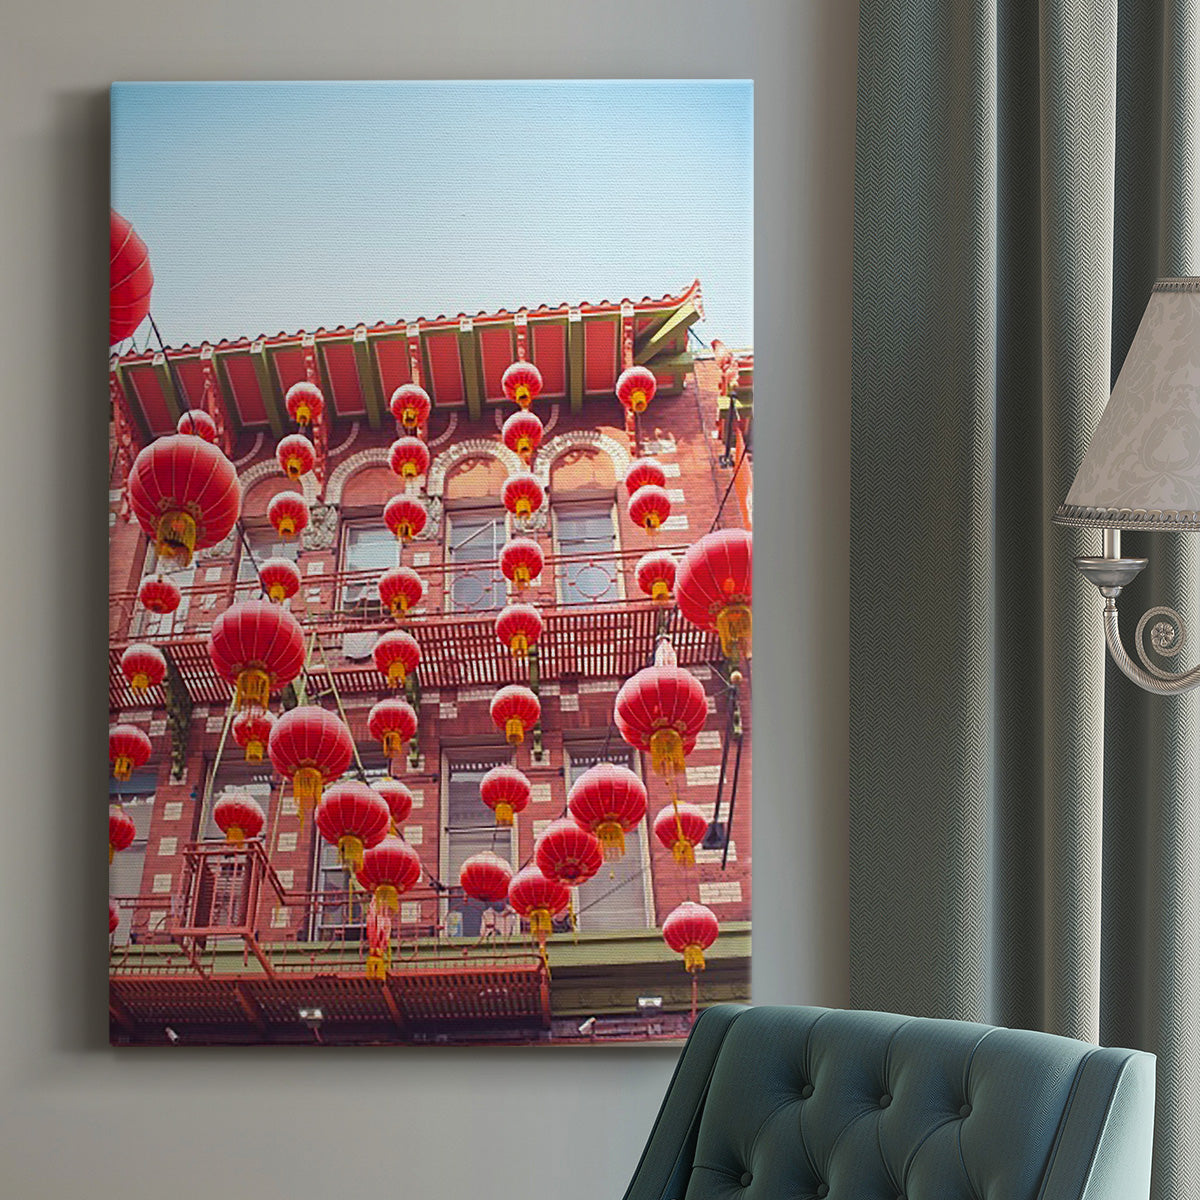 Lovely Lanterns II Premium Gallery Wrapped Canvas - Ready to Hang